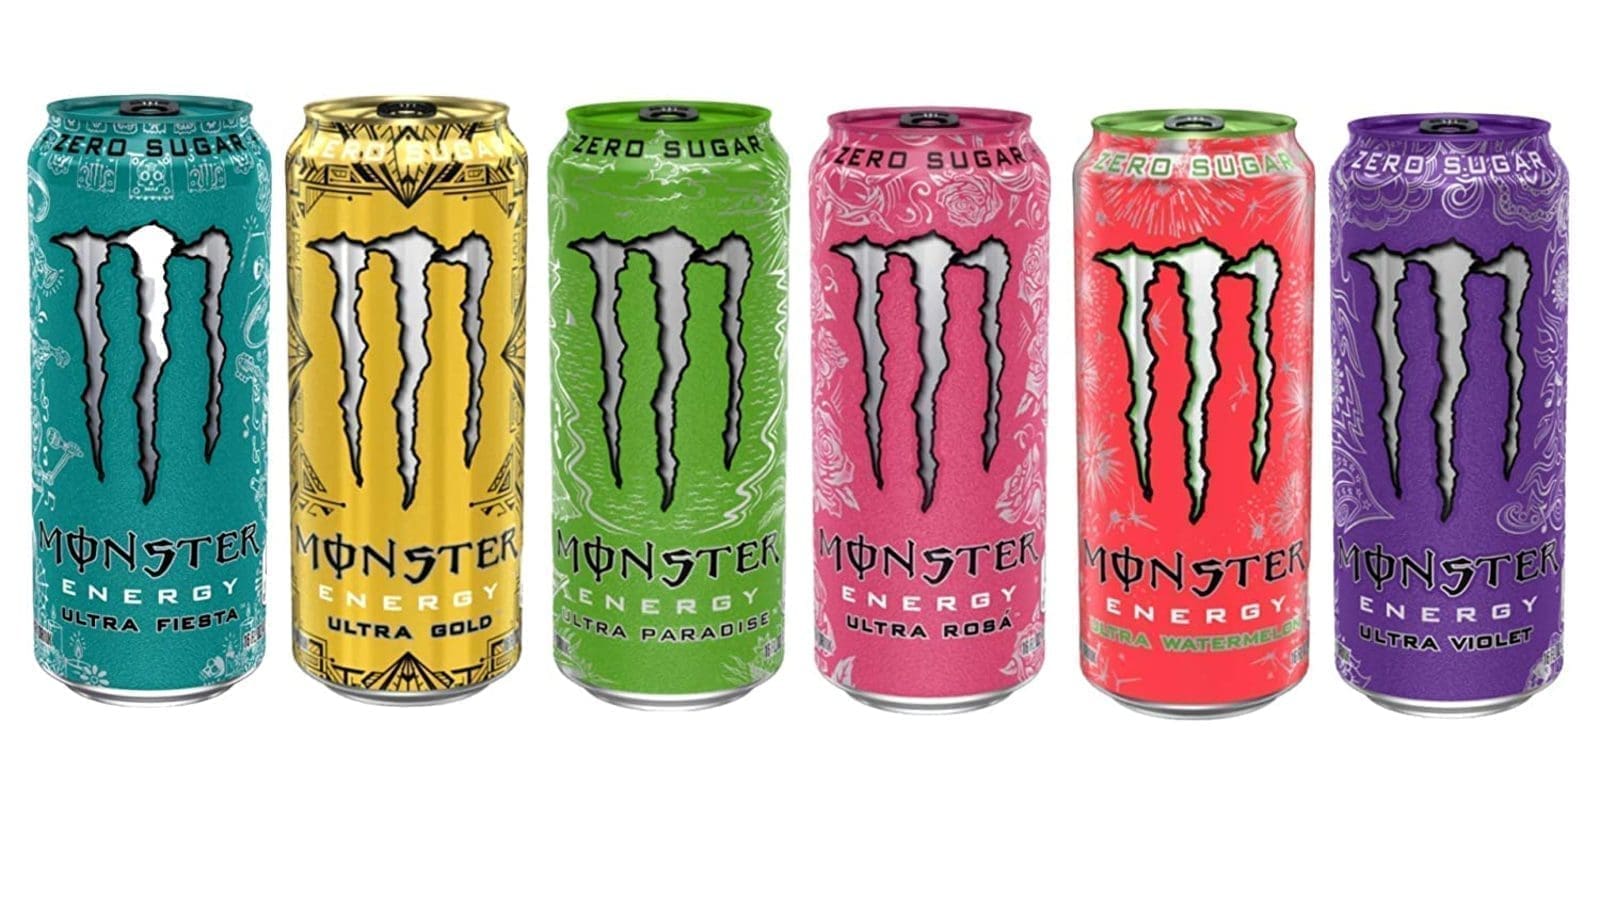 Monster Energy Company awarded US$293m from Bang Energy’s false advertisement of ingredients and health benefits lawsuit